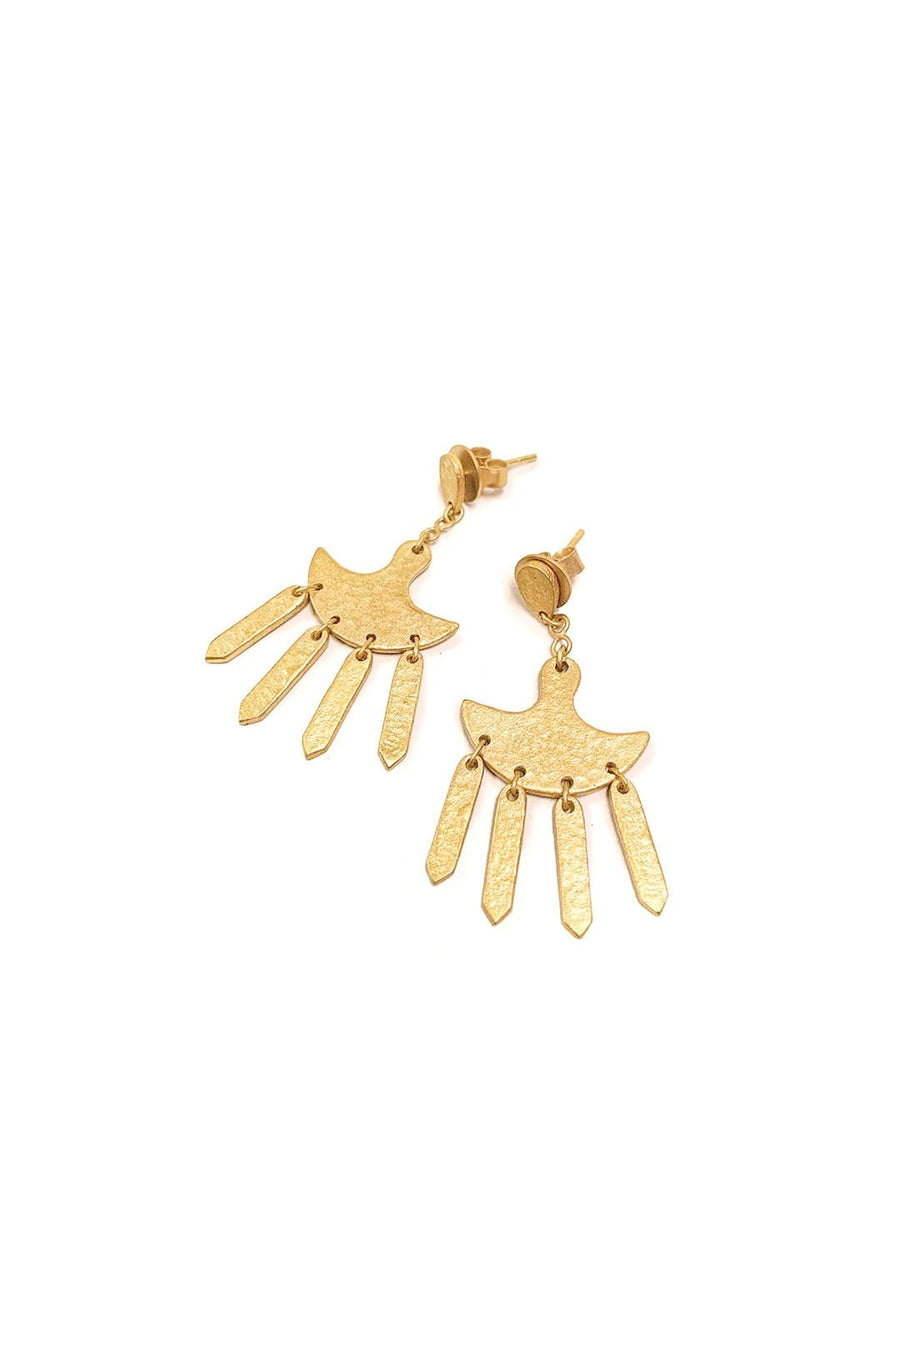 CLEOPATRA GOLD FRINGE DROP EARRINGS - Burning Torch Online Boutique